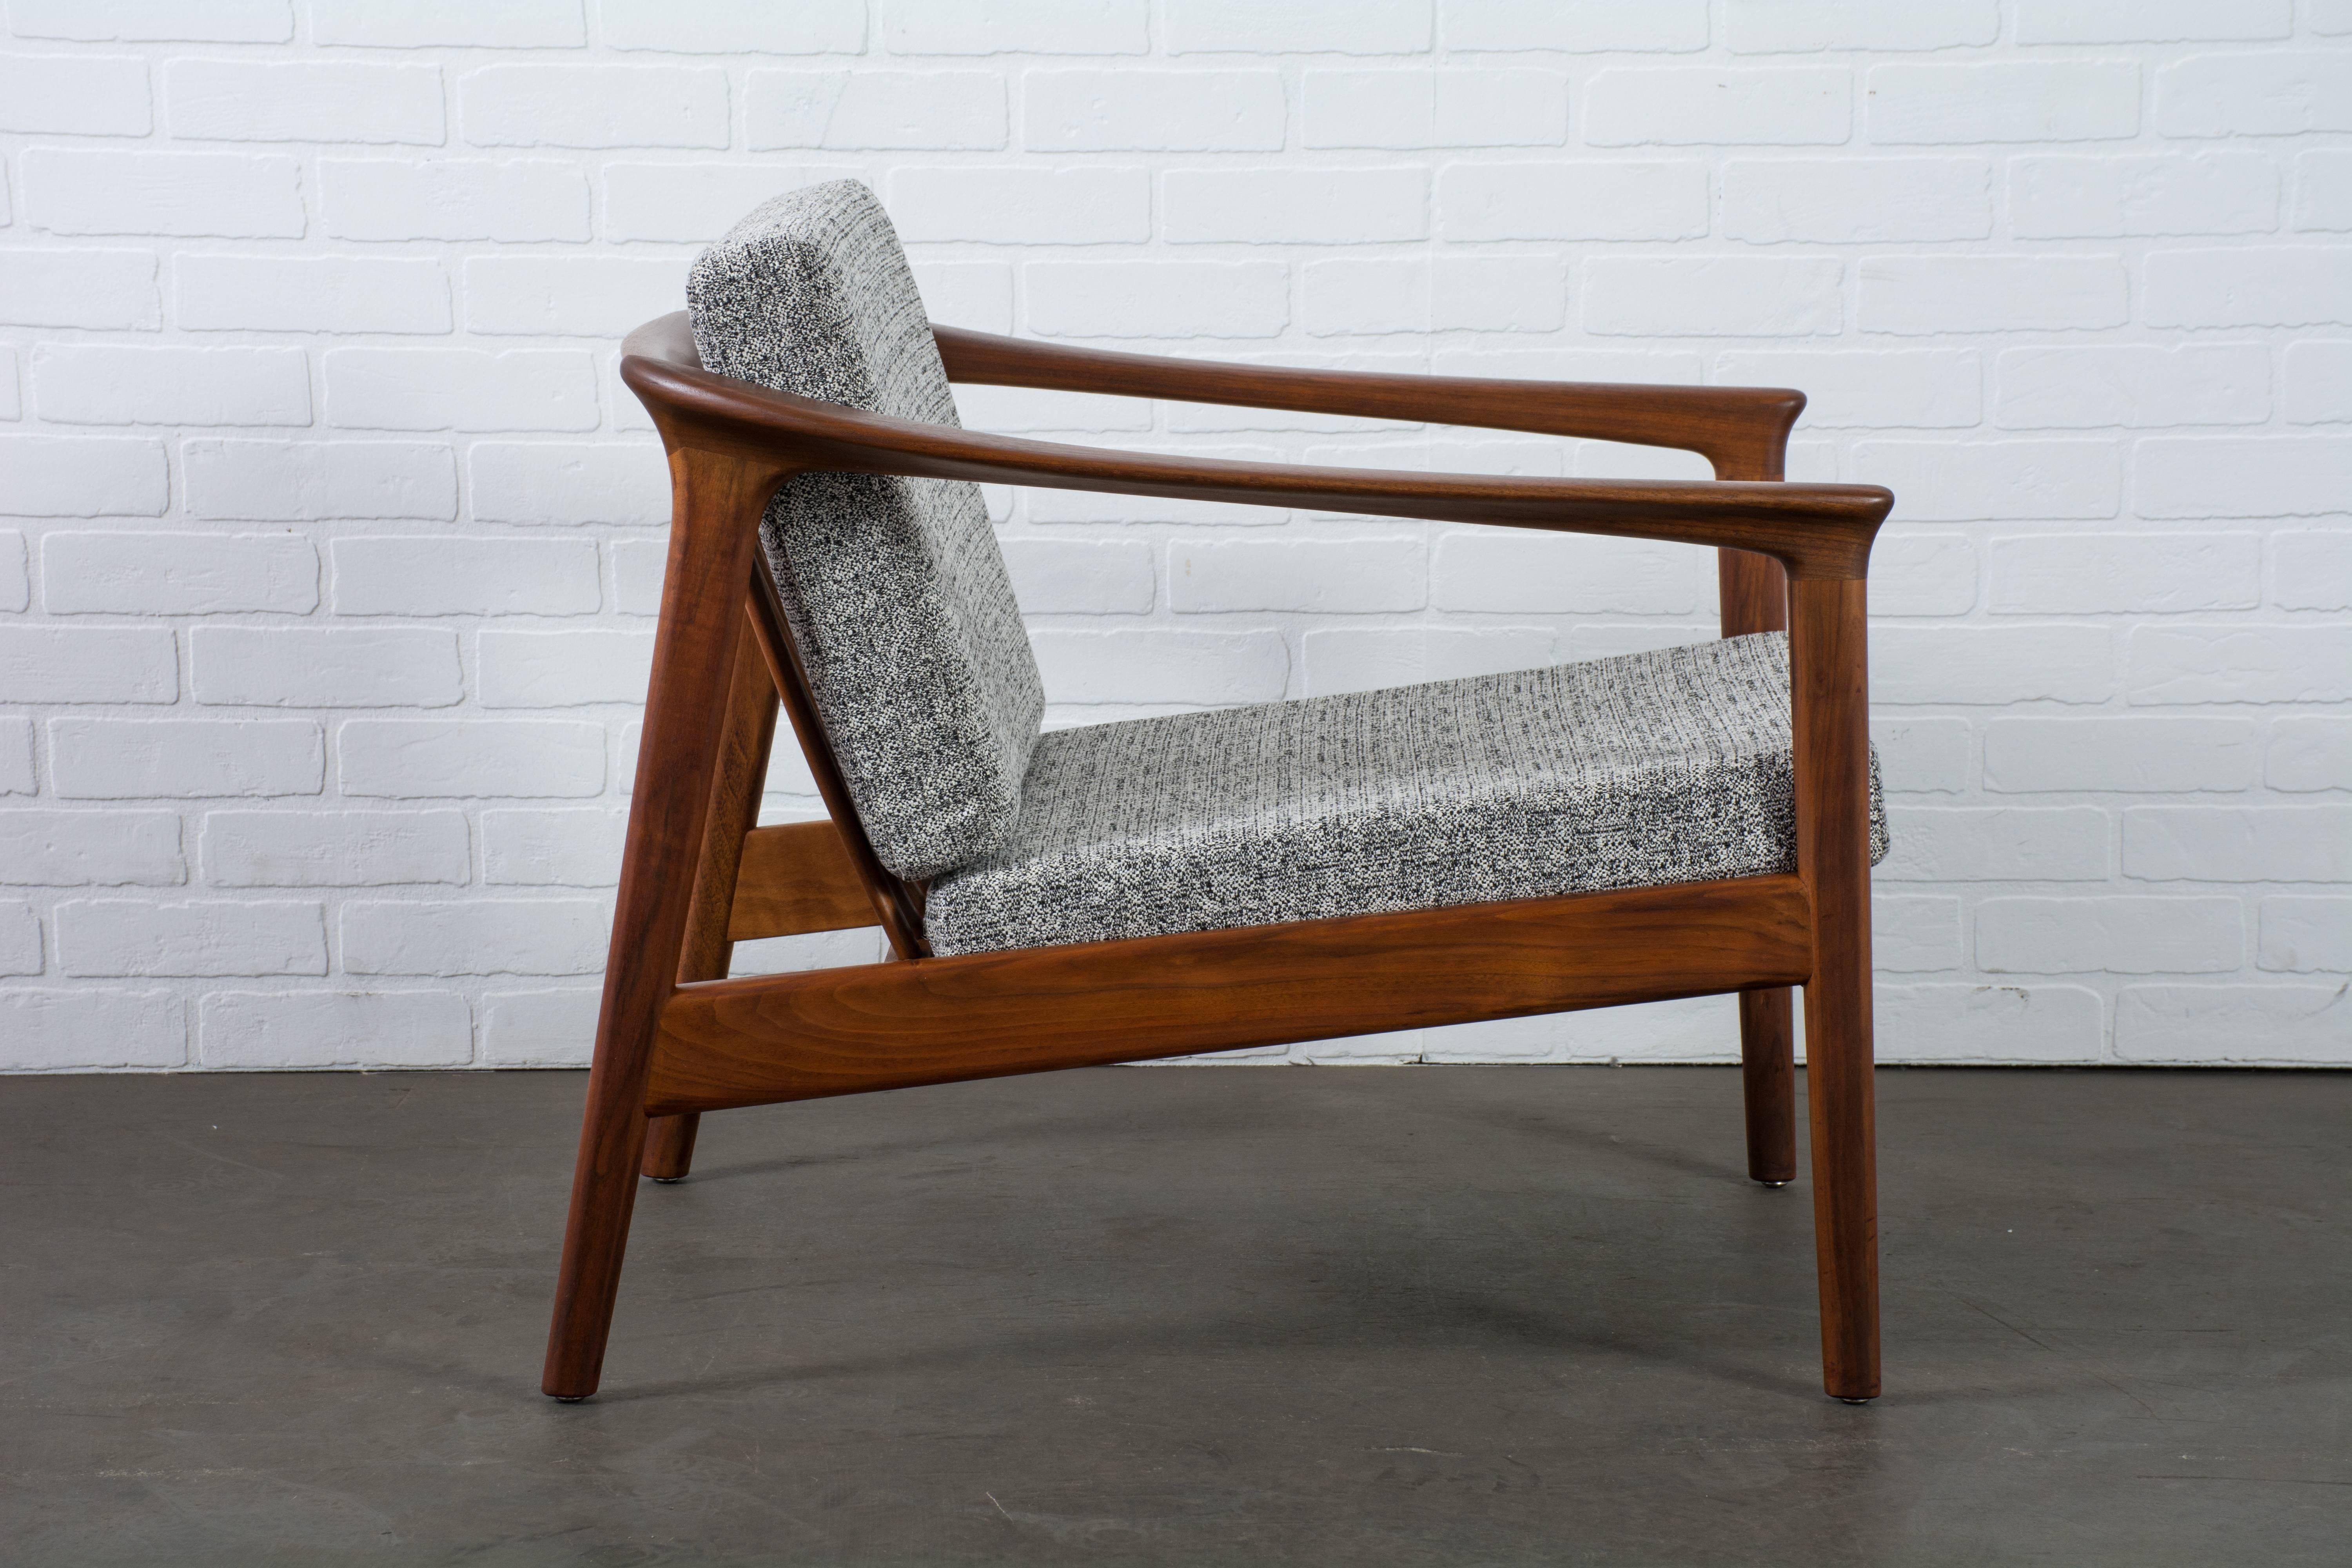 Swedish Mid-Century Modern Lounge Chair by Folke Ohlsson for DUX